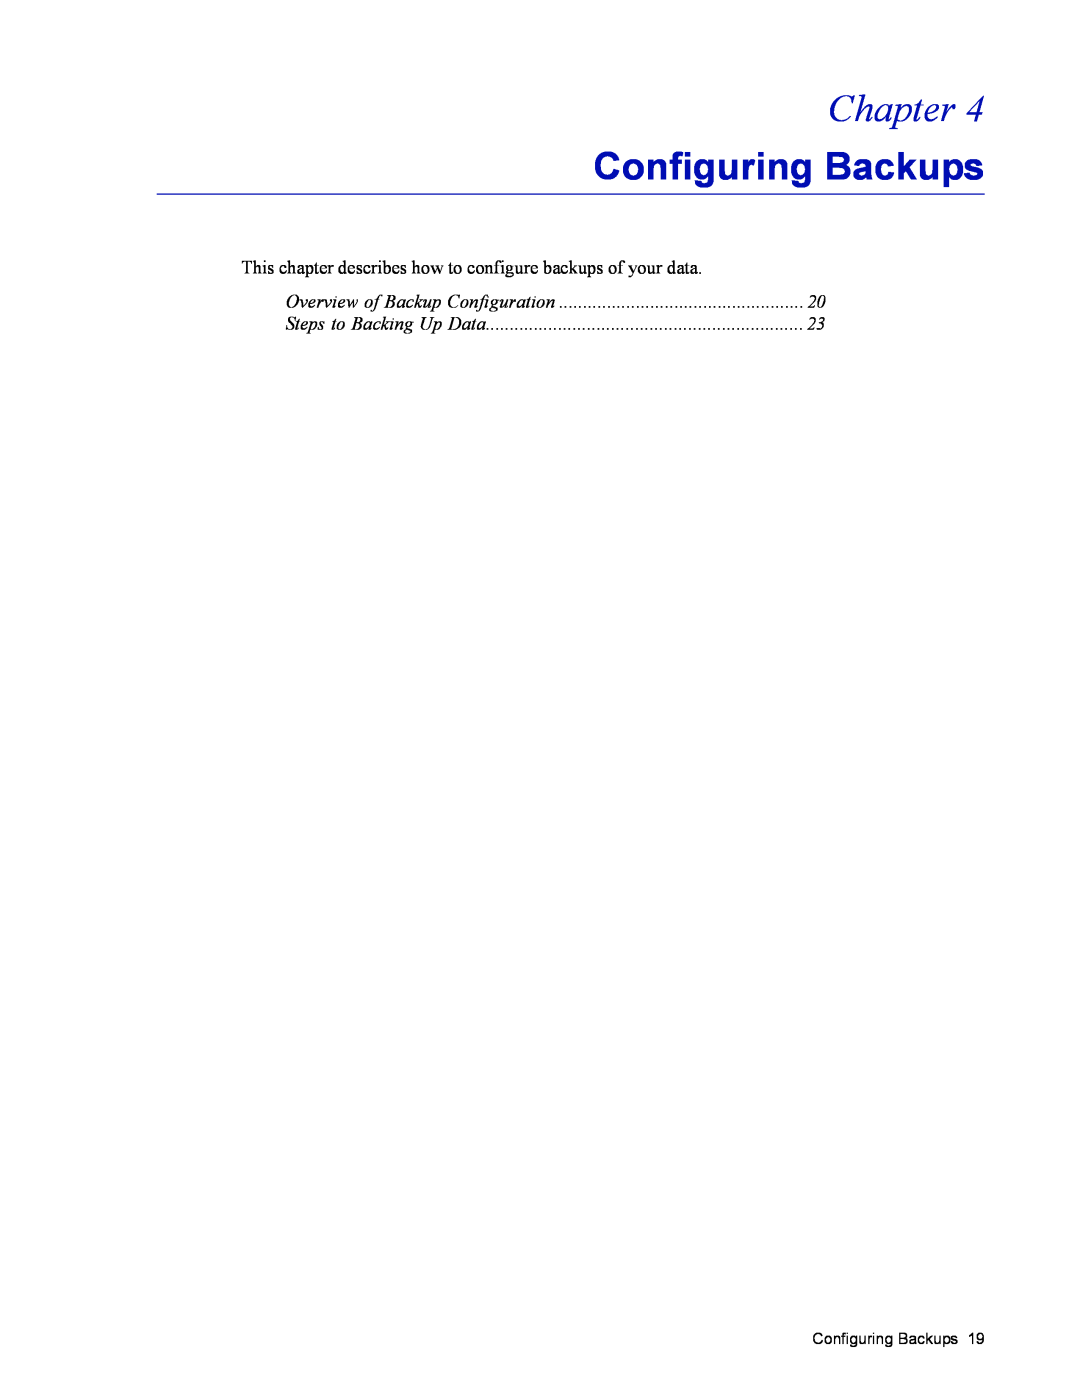 Barracuda Networks 4 manual Configuring Backups, Chapter, This chapter describes how to configure backups of your data 